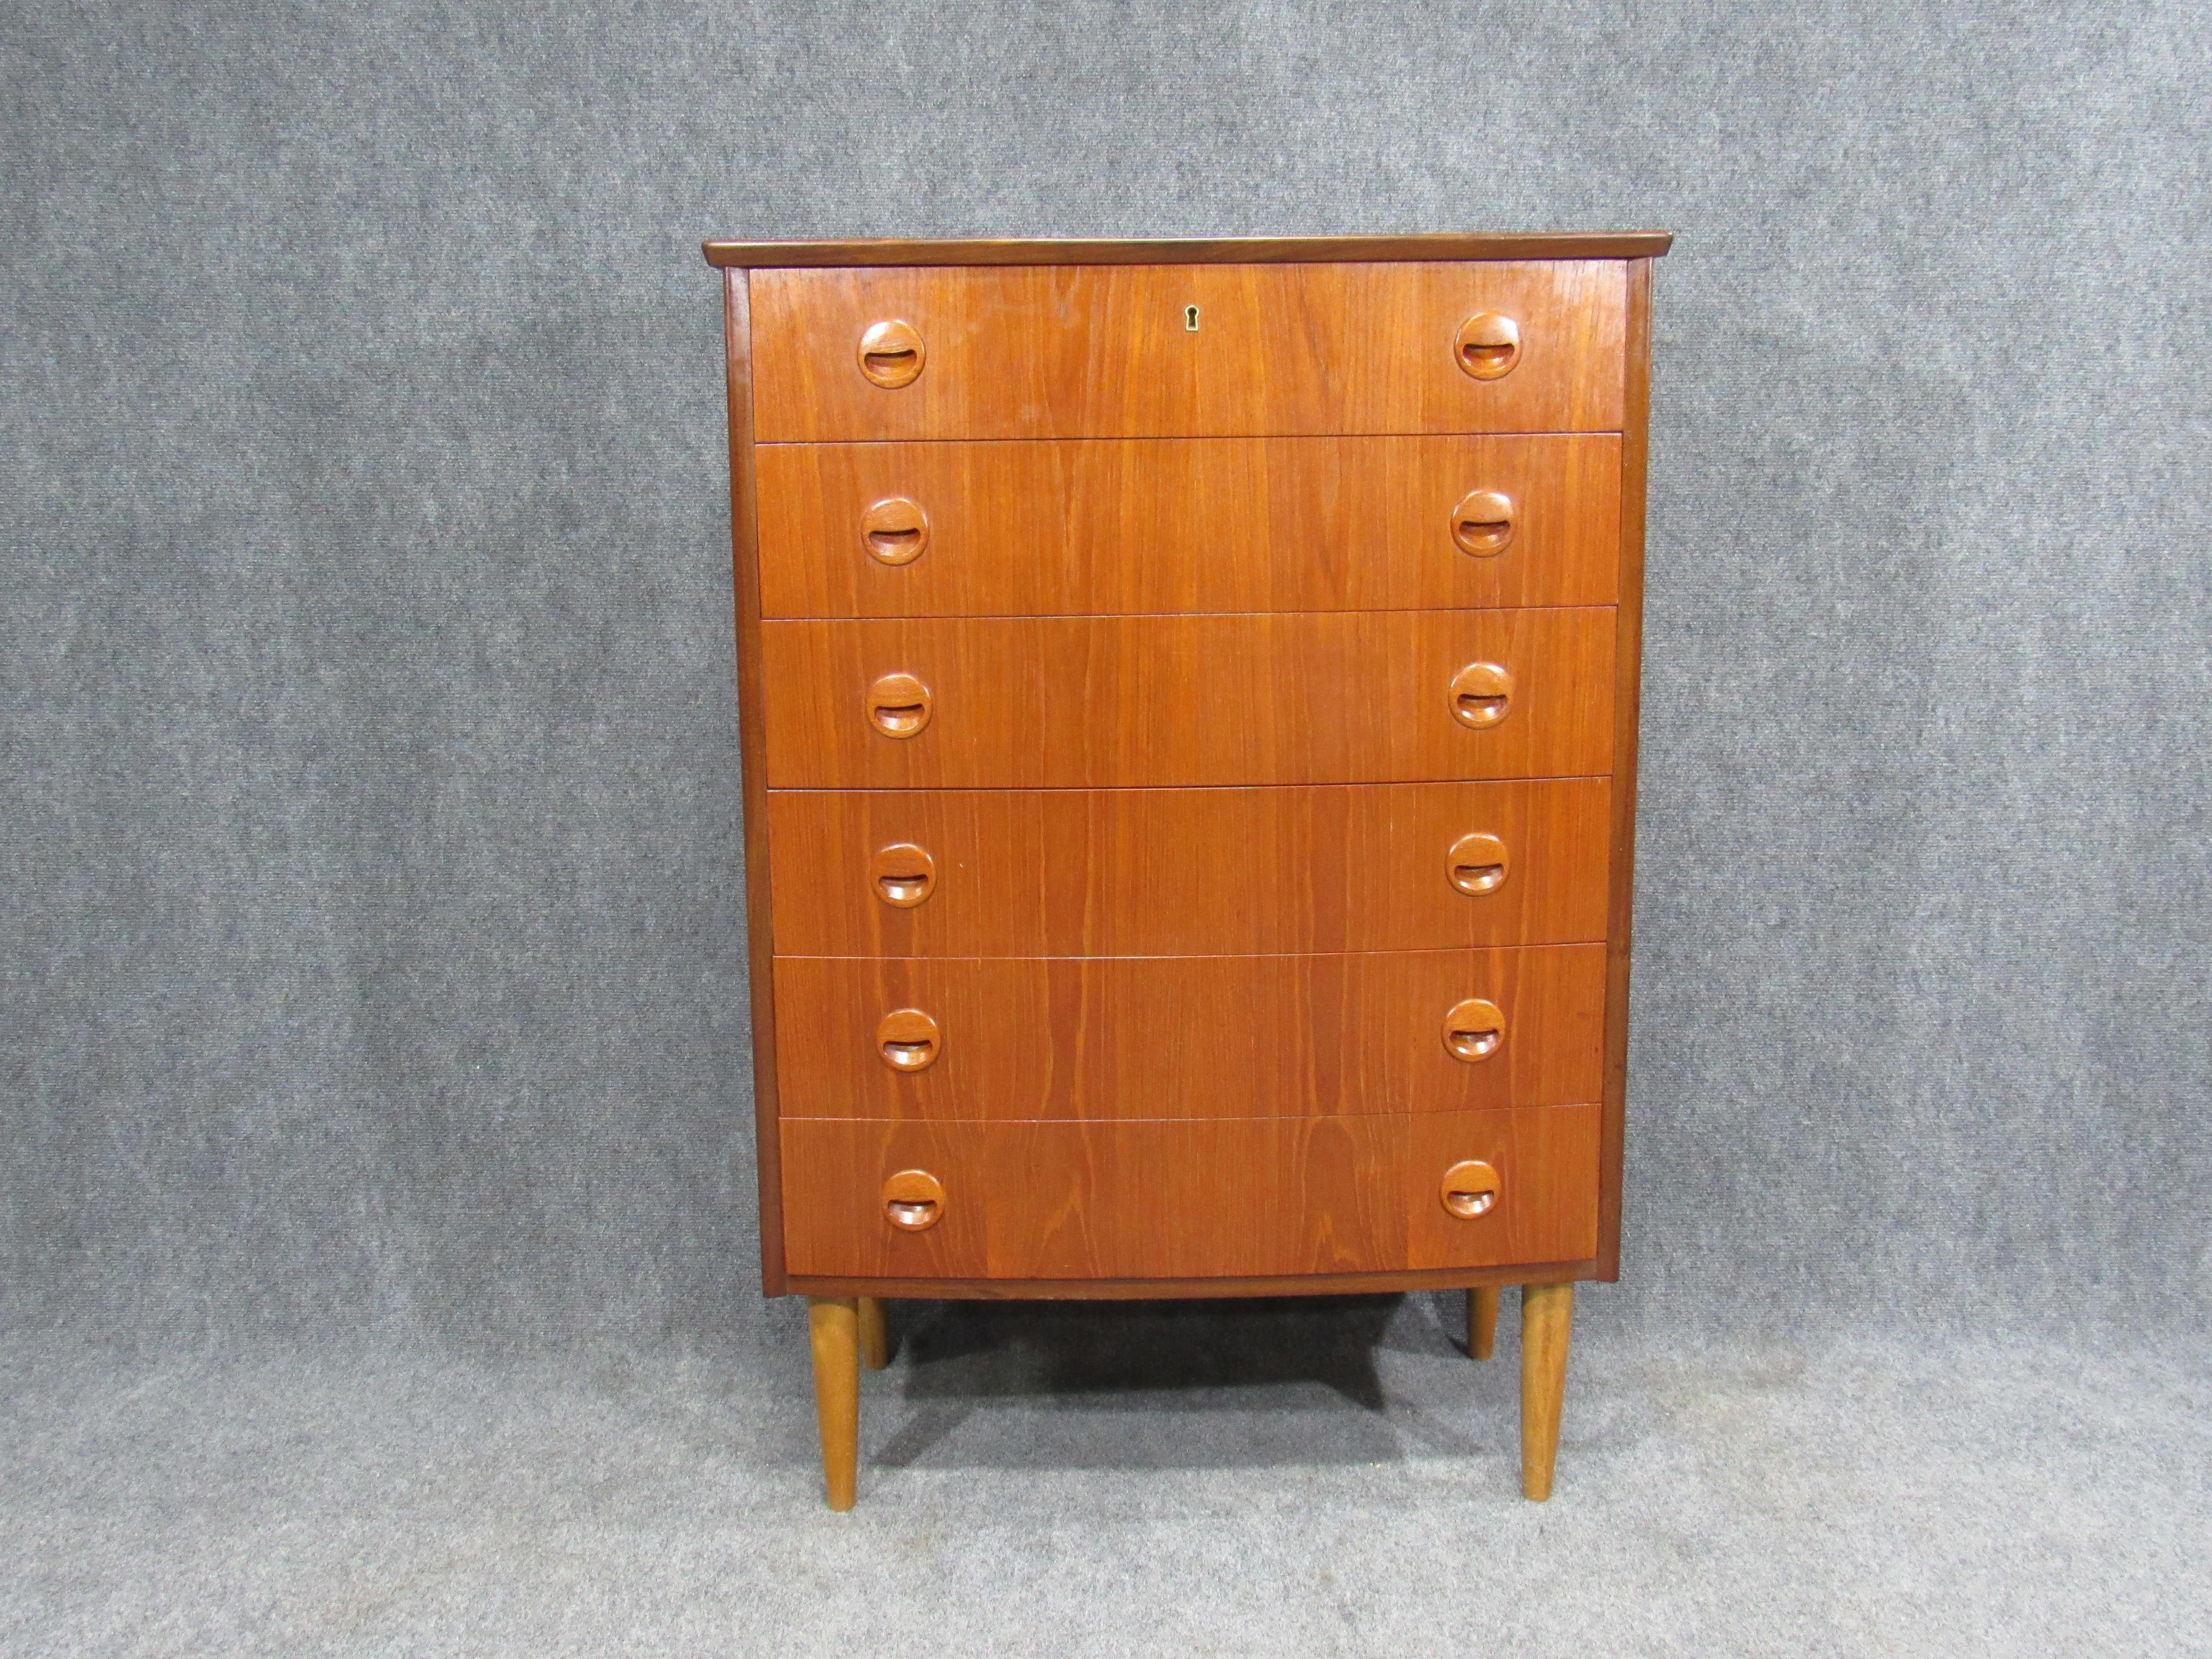 Mid-century Danish modern teak dresser / chest of drawers with elegant rounded front. Original drawer lock key is provided with the piece.